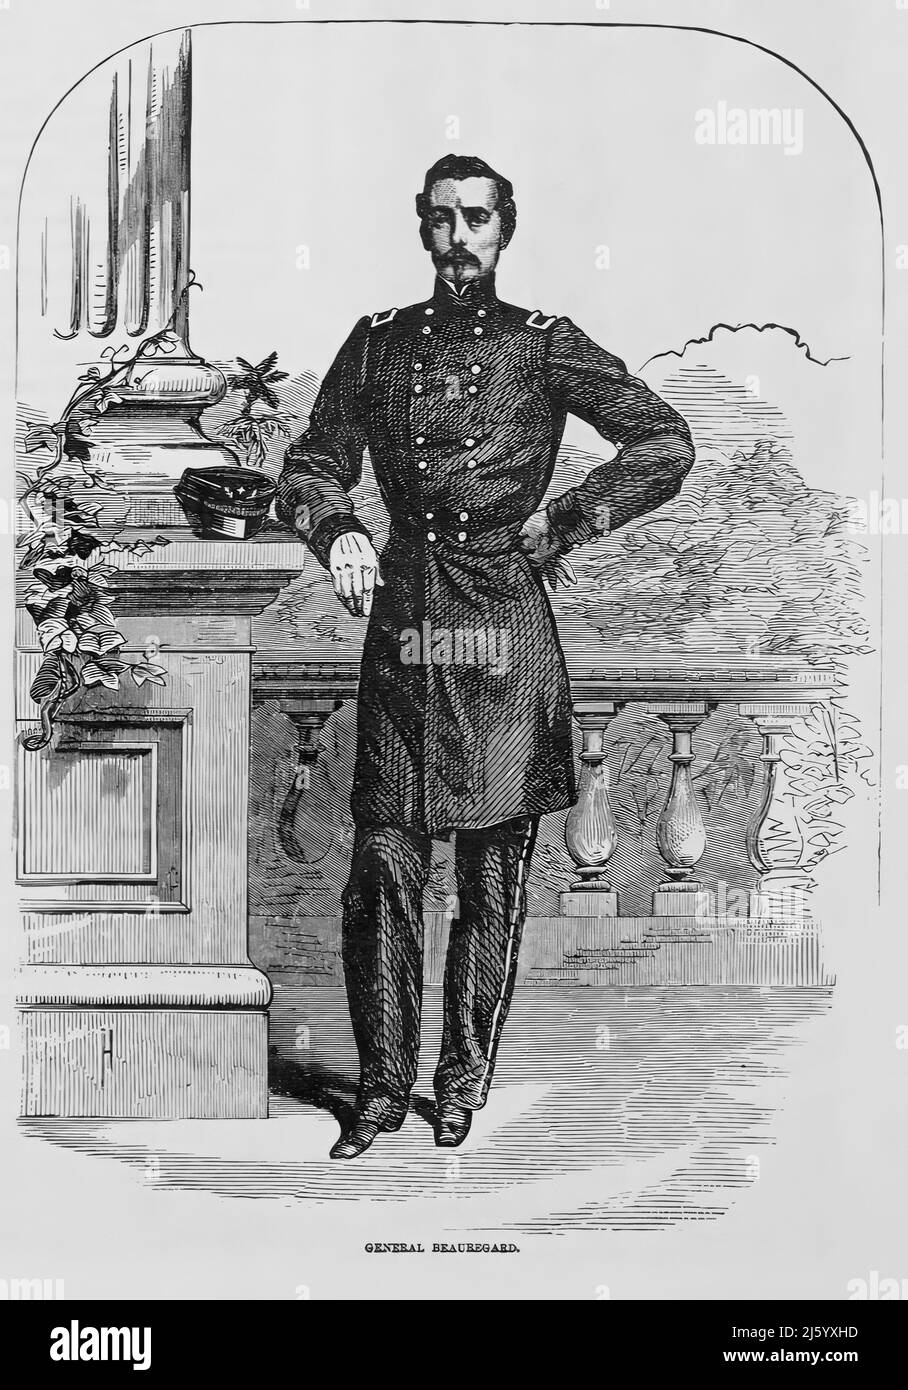 Portrait of Pierre Gustave Toutant-Beauregard, Confederate Army General in the American Civil War. 19th century illustration Stock Photo